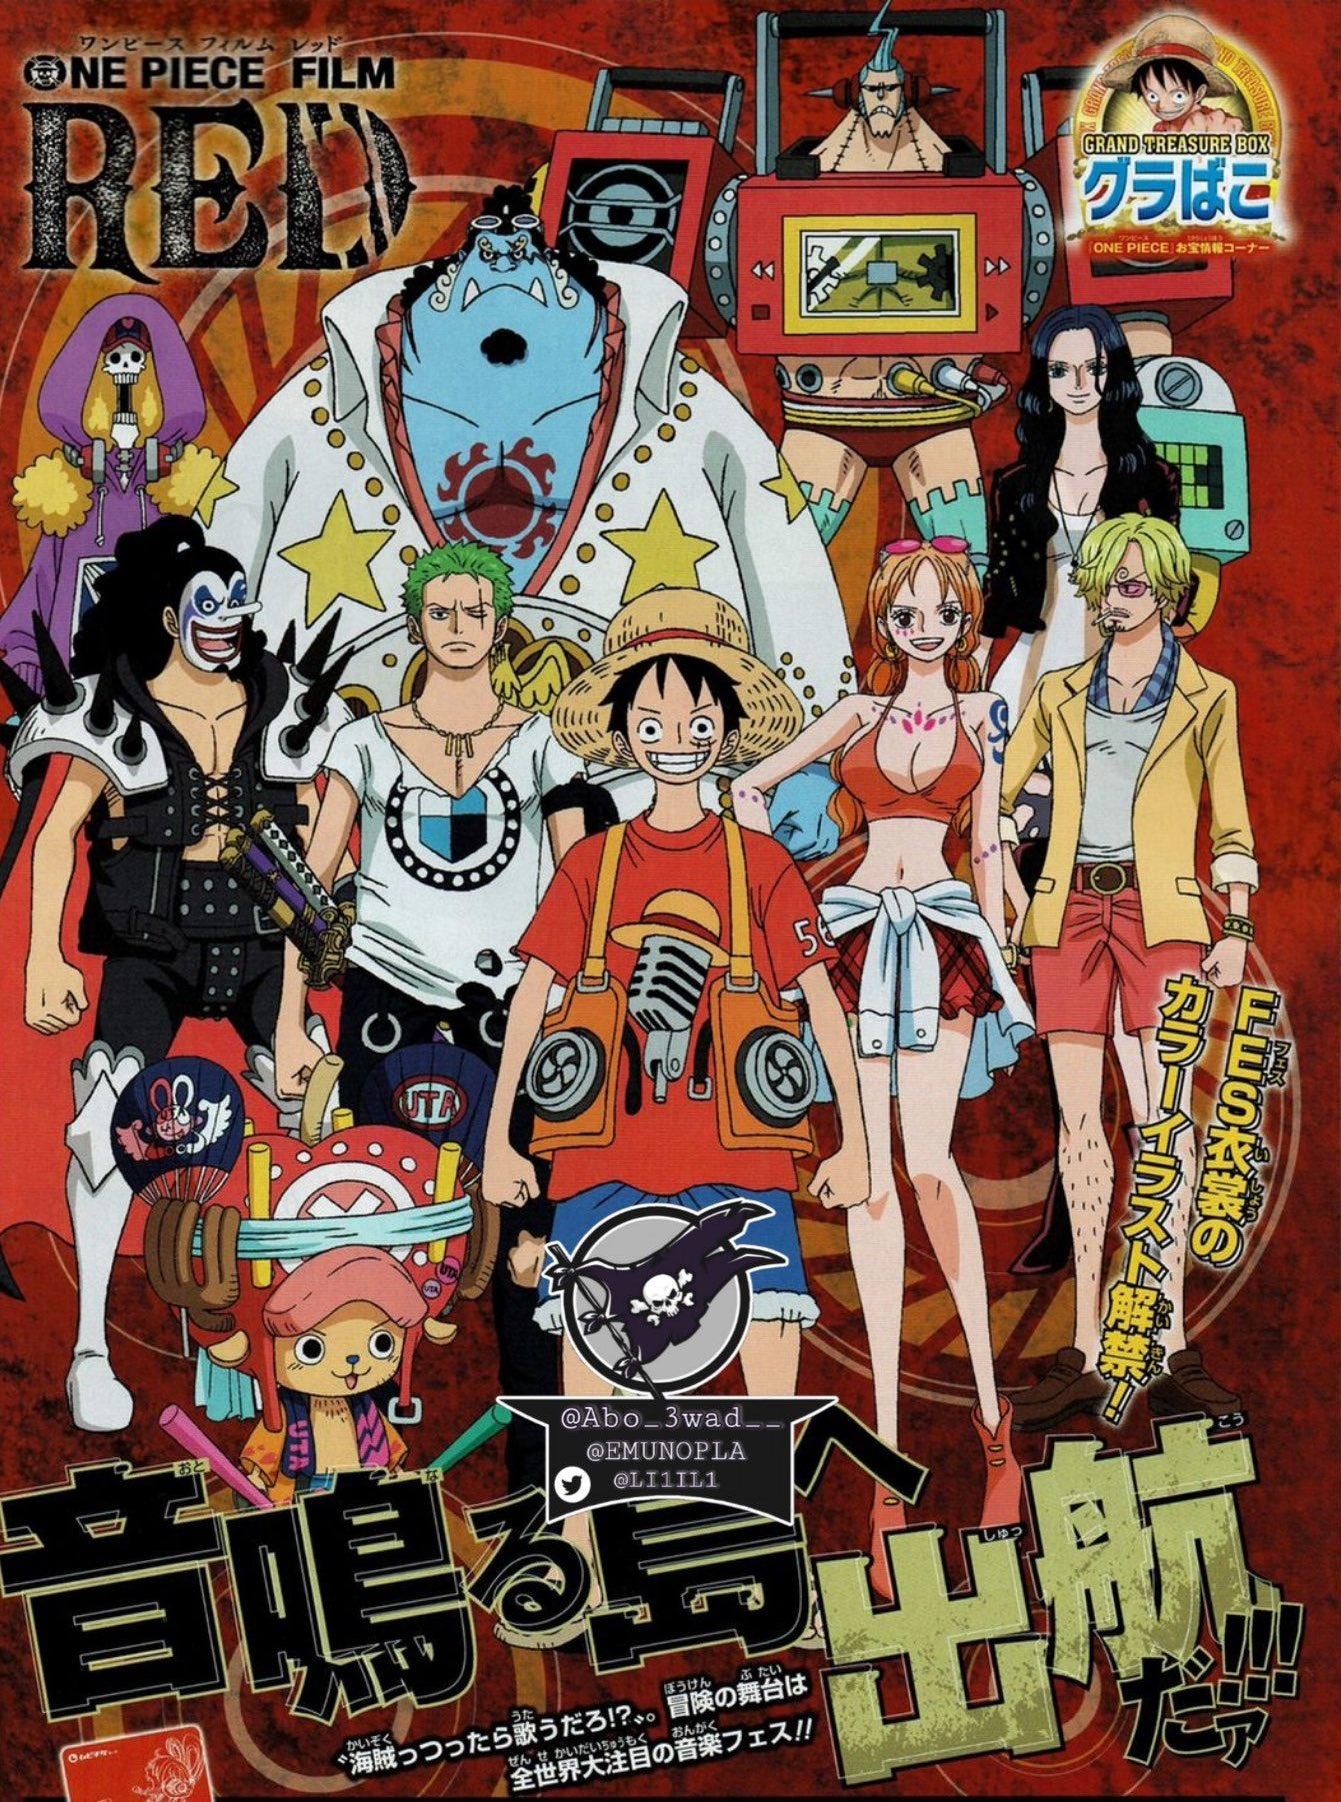 Here are the strawhats' outfits for the One Piece Film Red